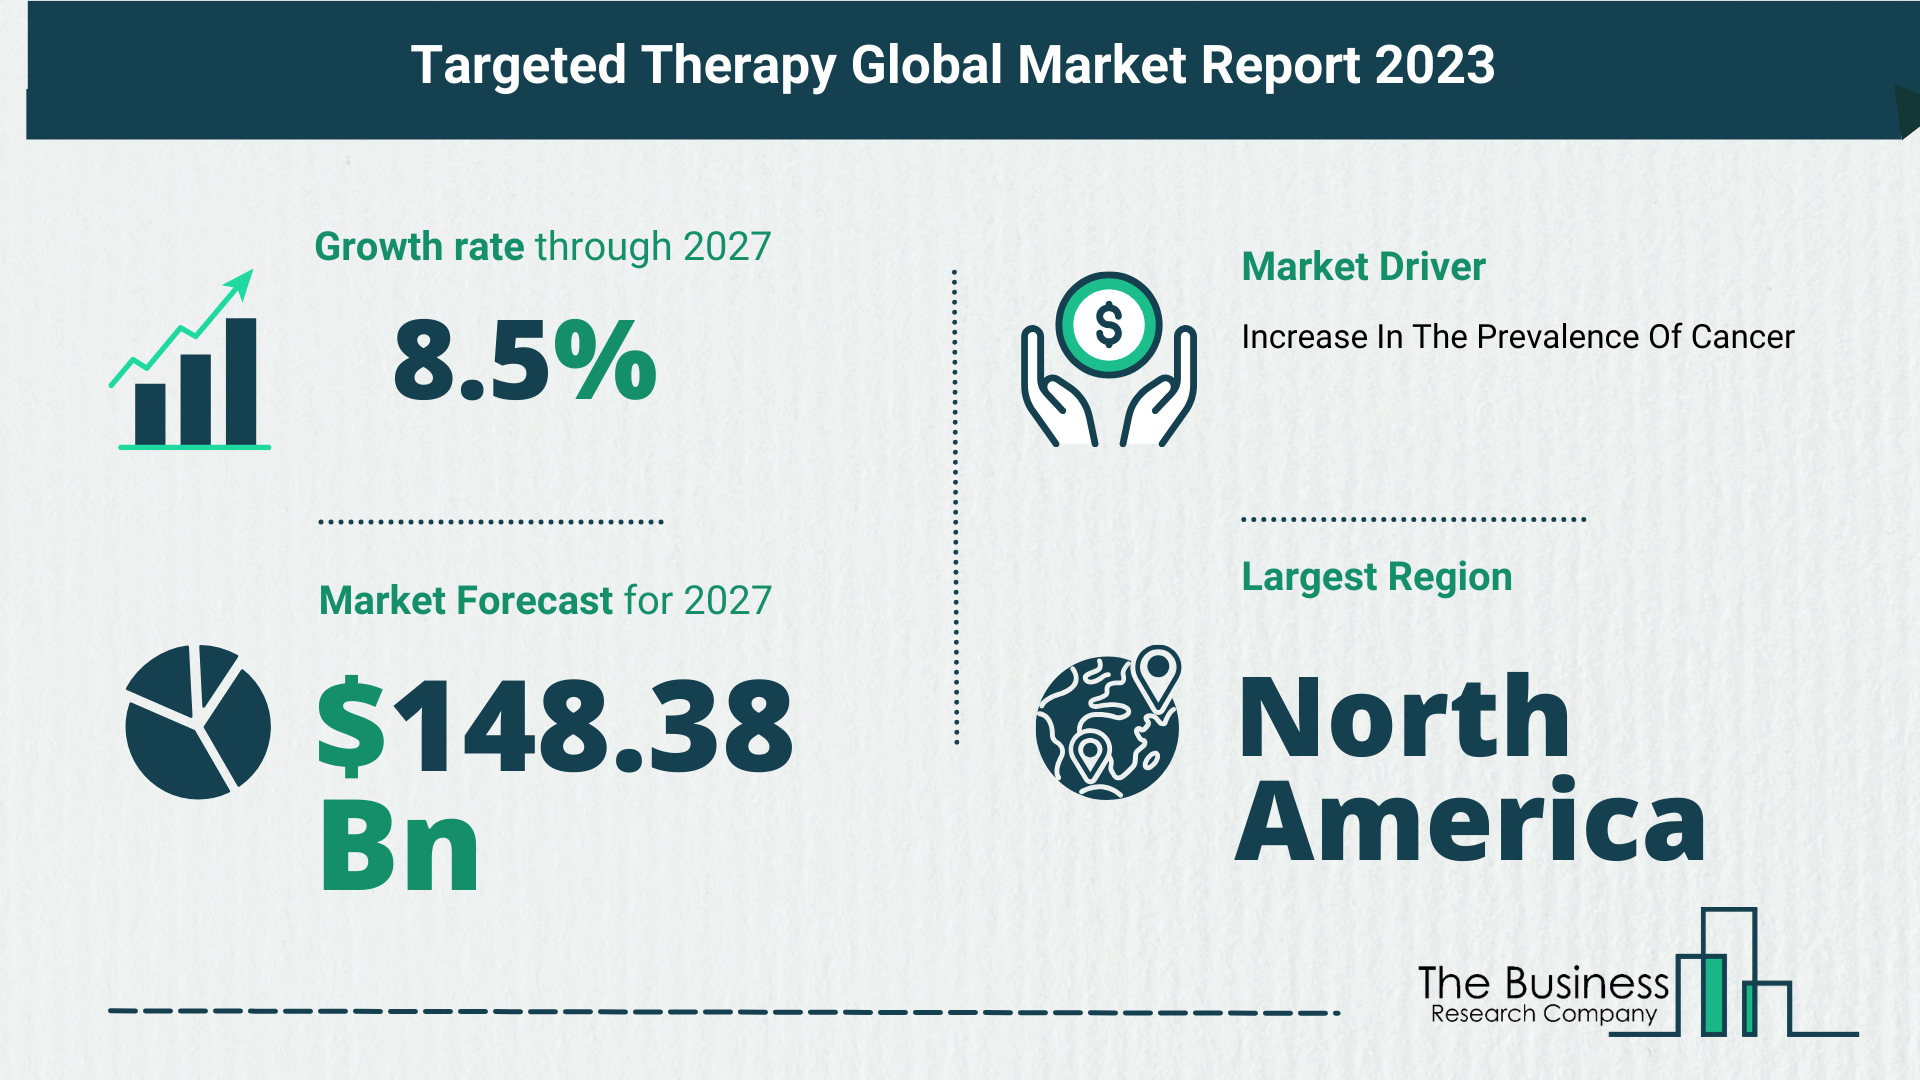 Global Targeted Therapy Market